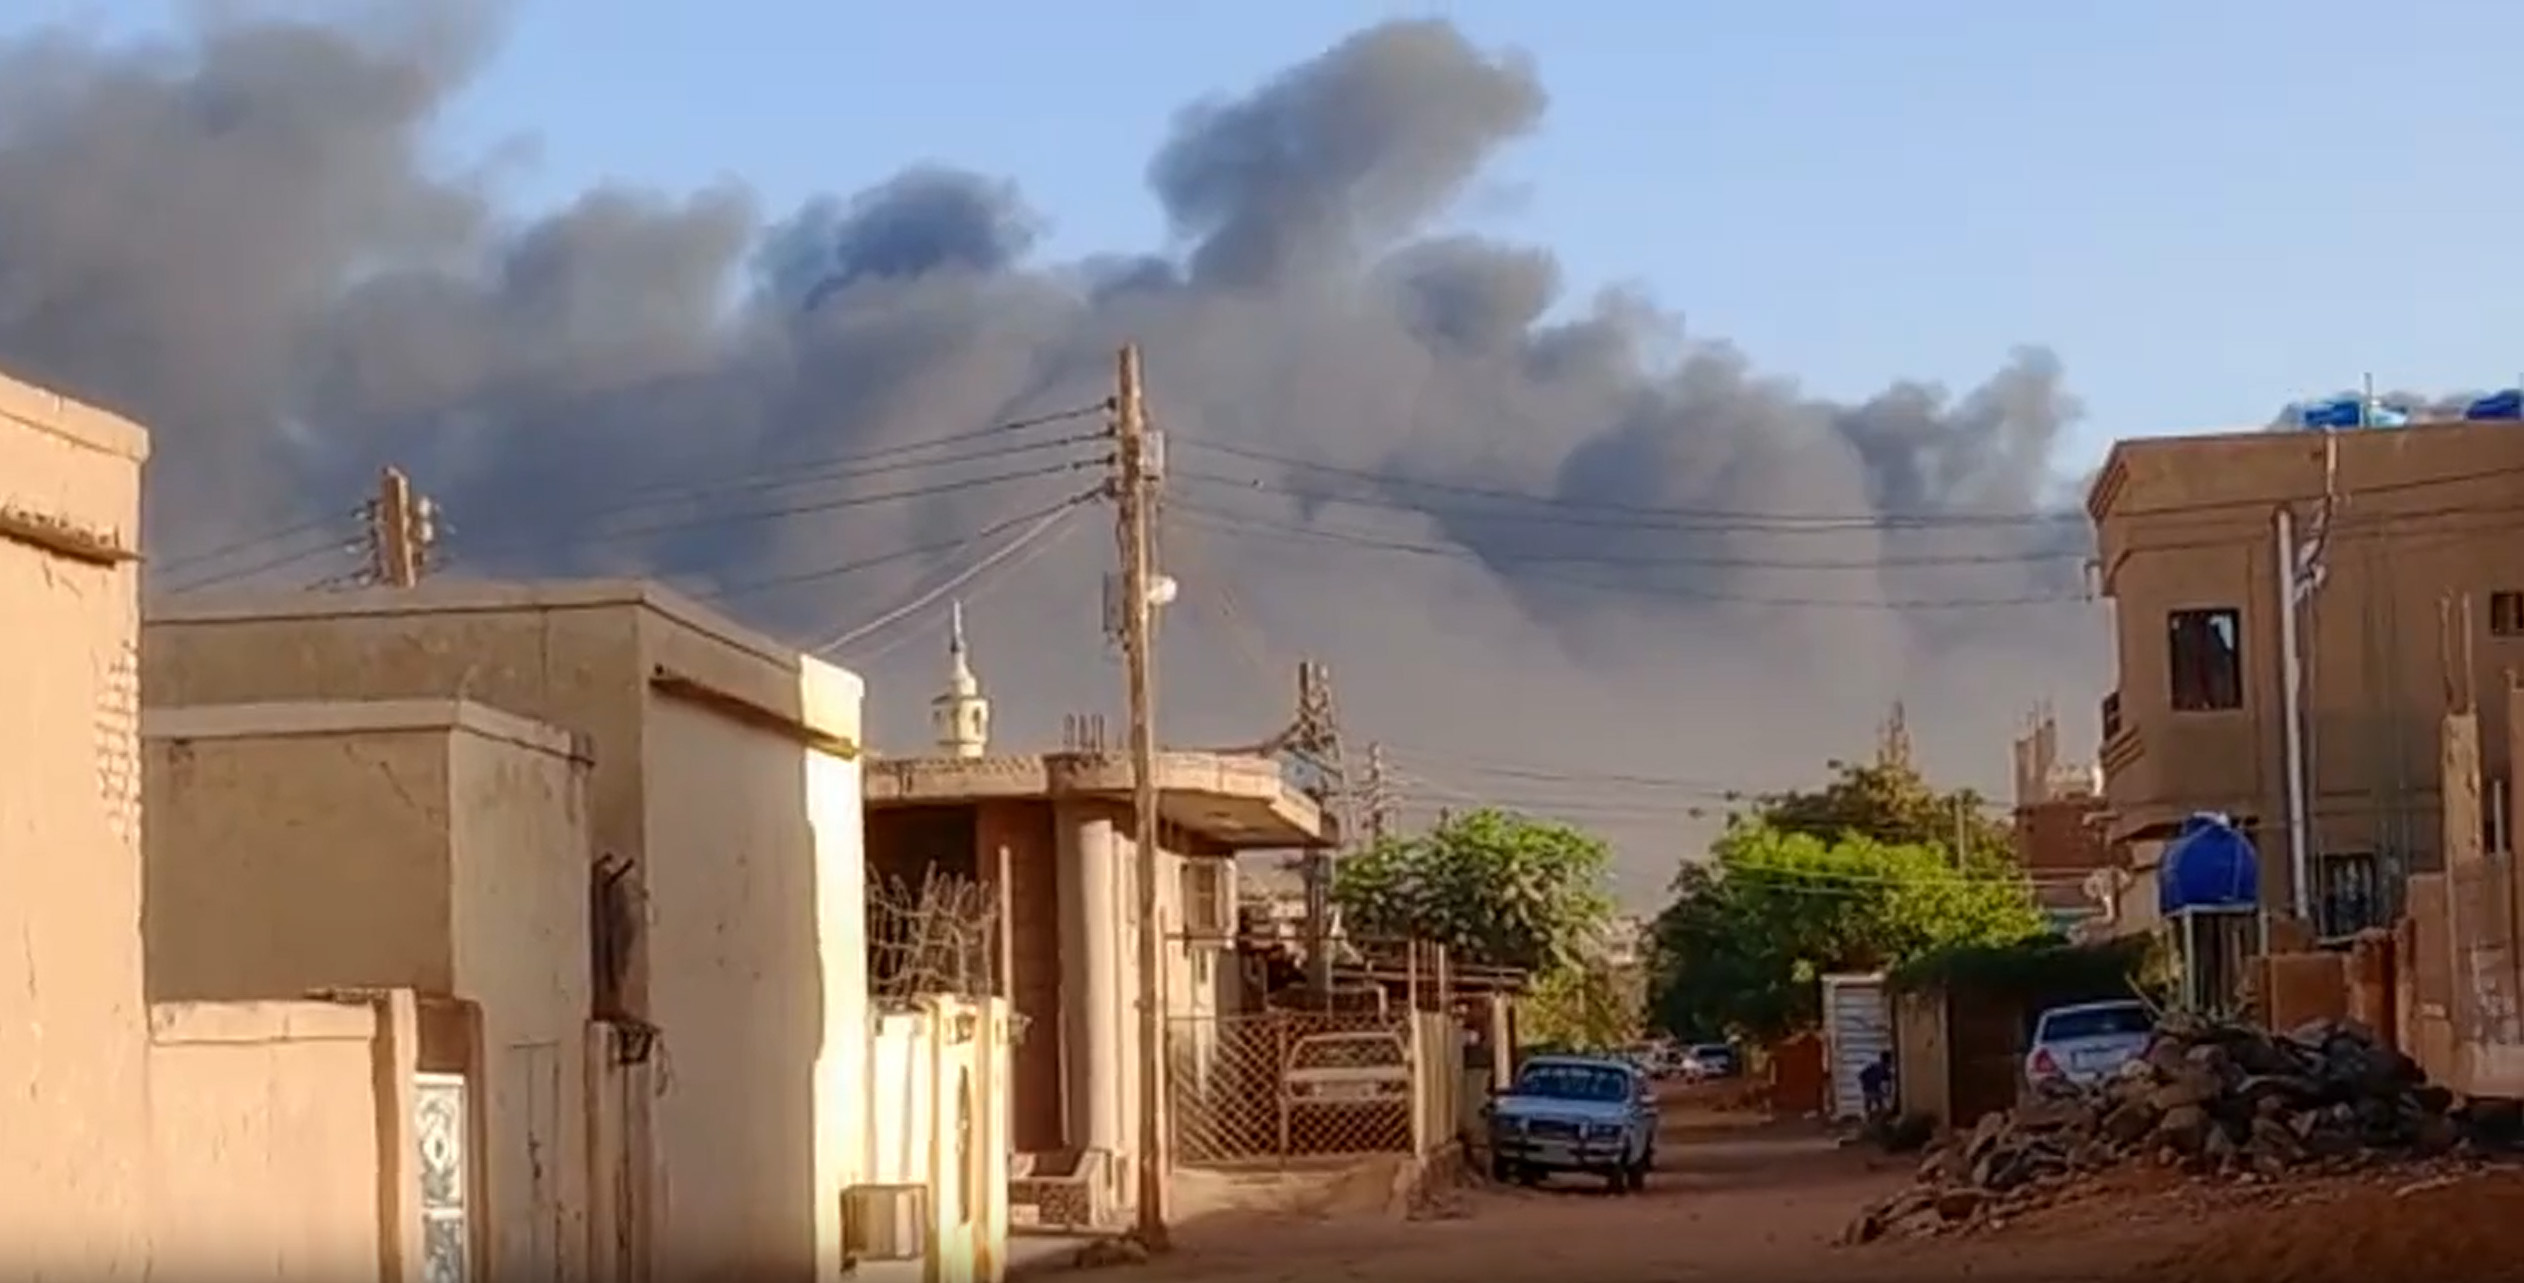 PHOTO: In this screen grab from a video, smoke rises over Khartoum, Sudan, on April 21, 2023.